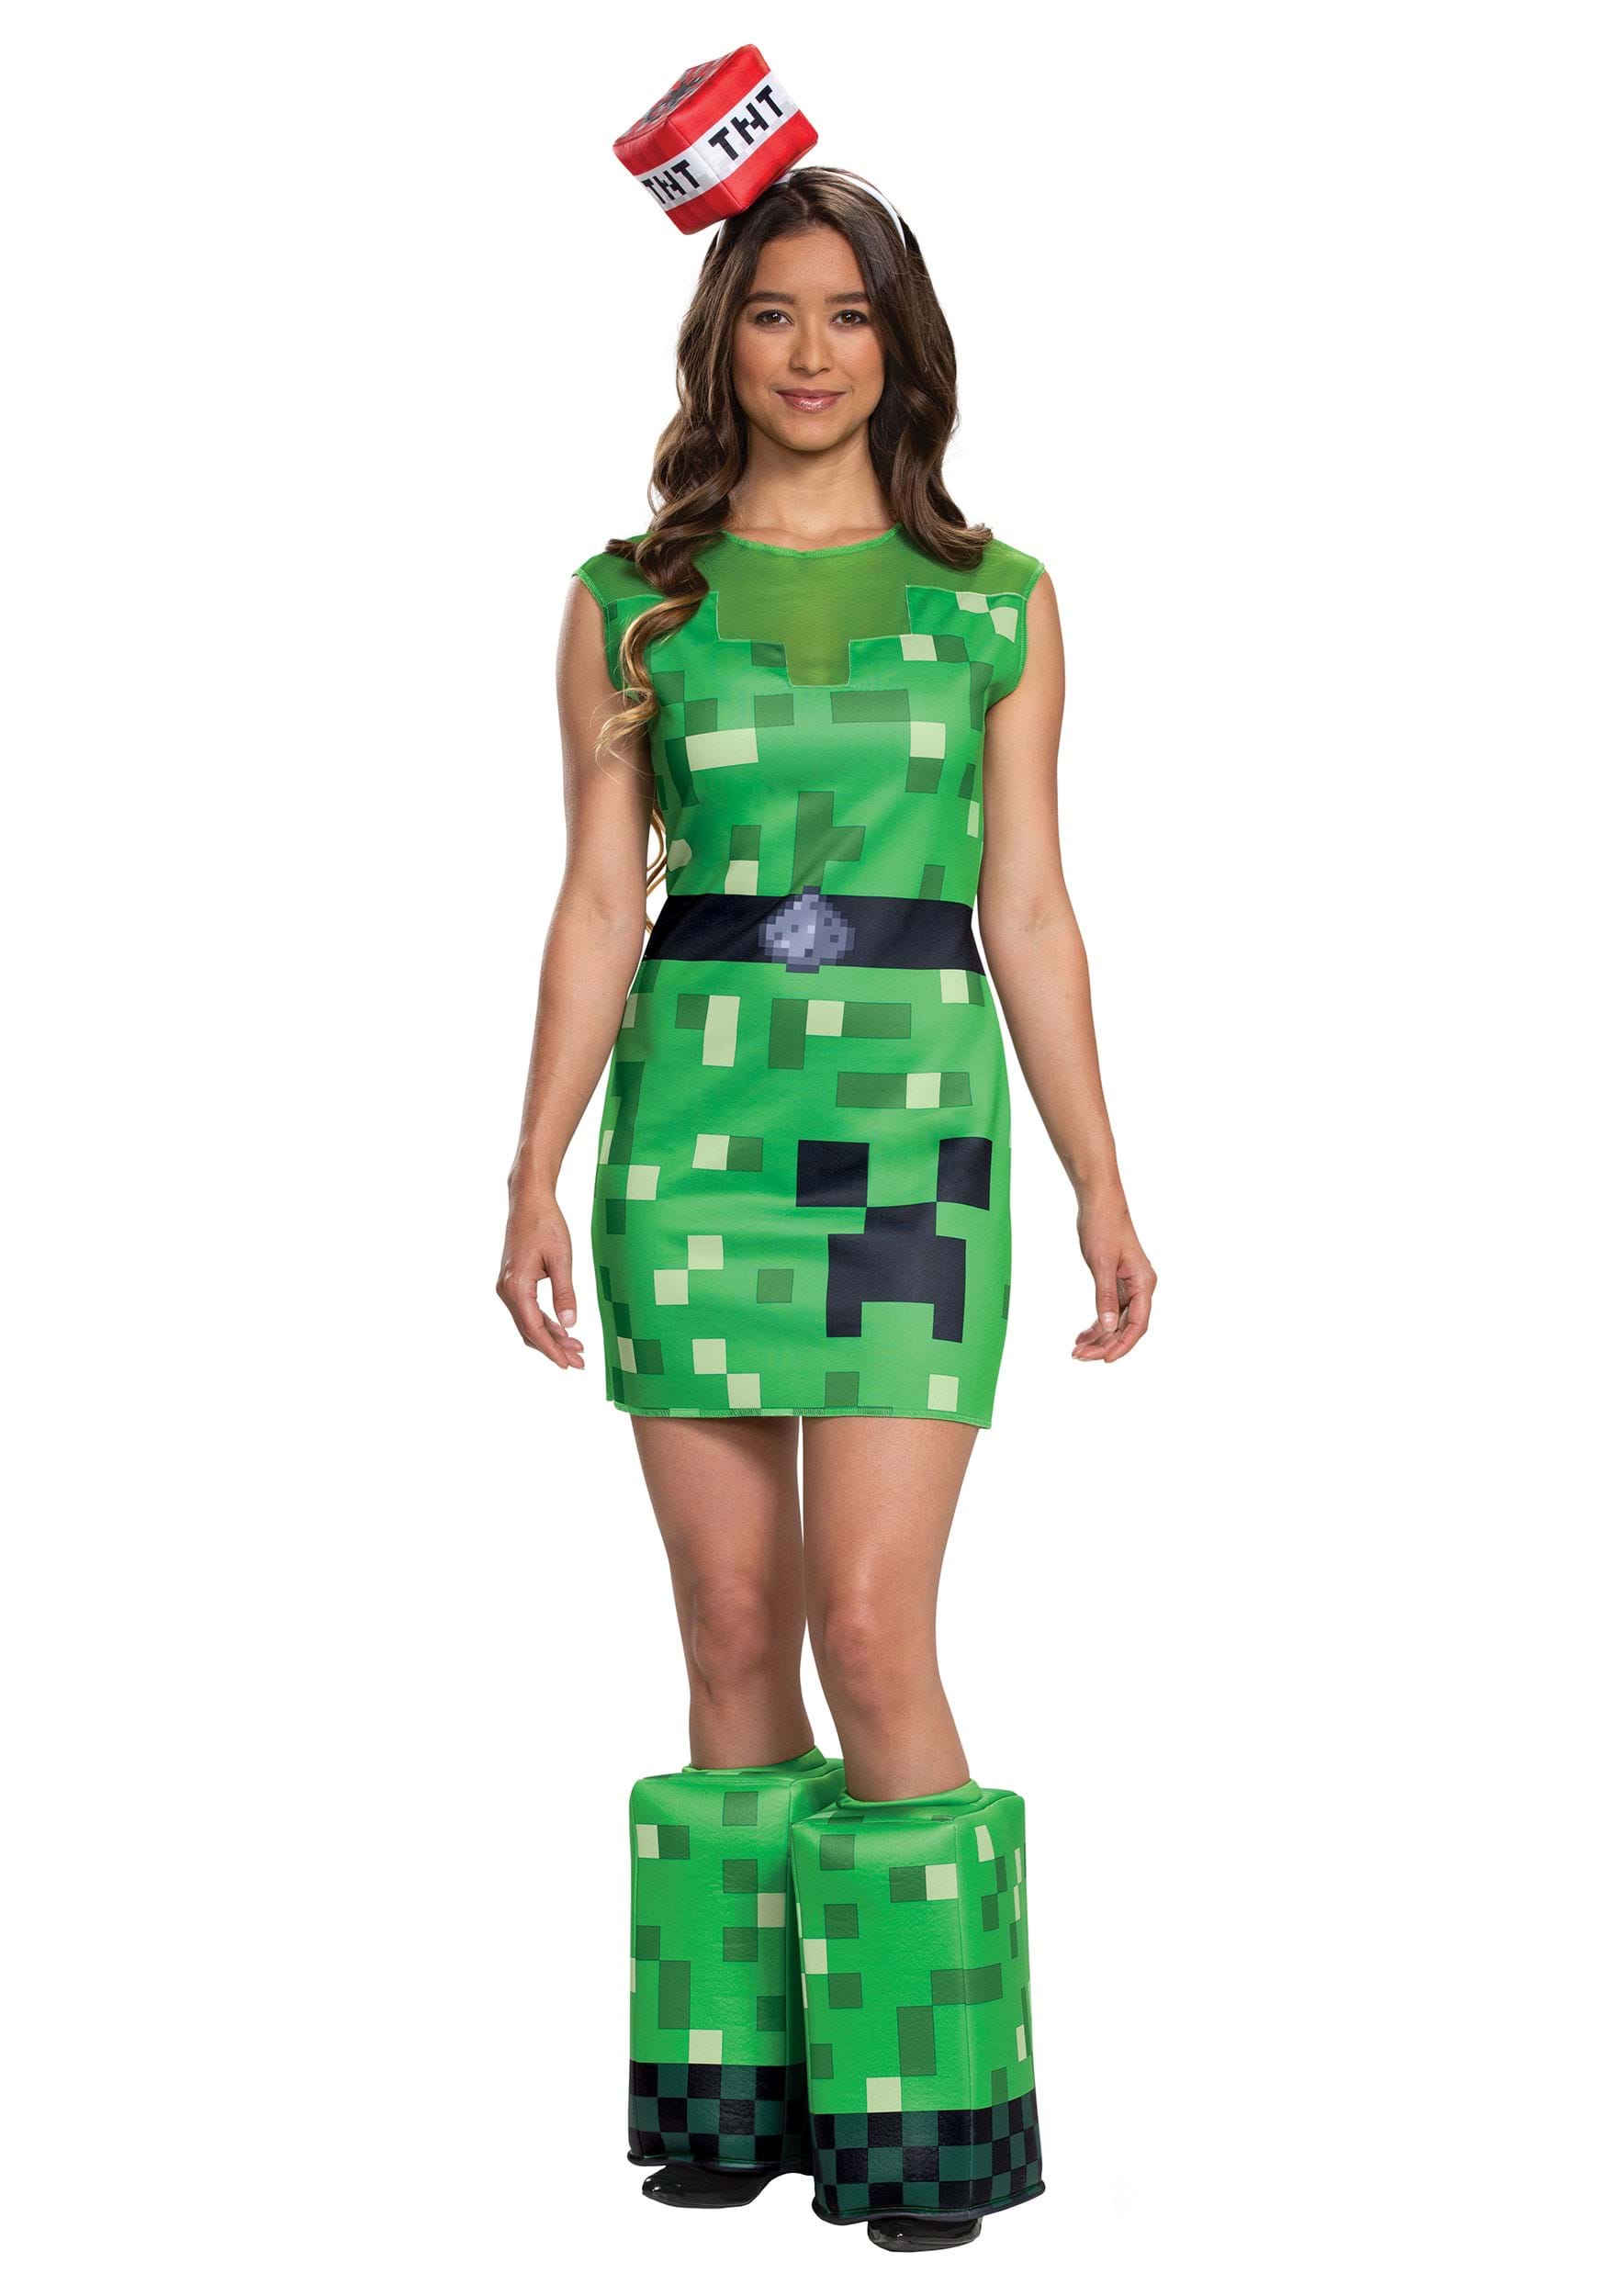 Photos - Fancy Dress Disguise Minecraft Creeper Costume for Women Green DI67741